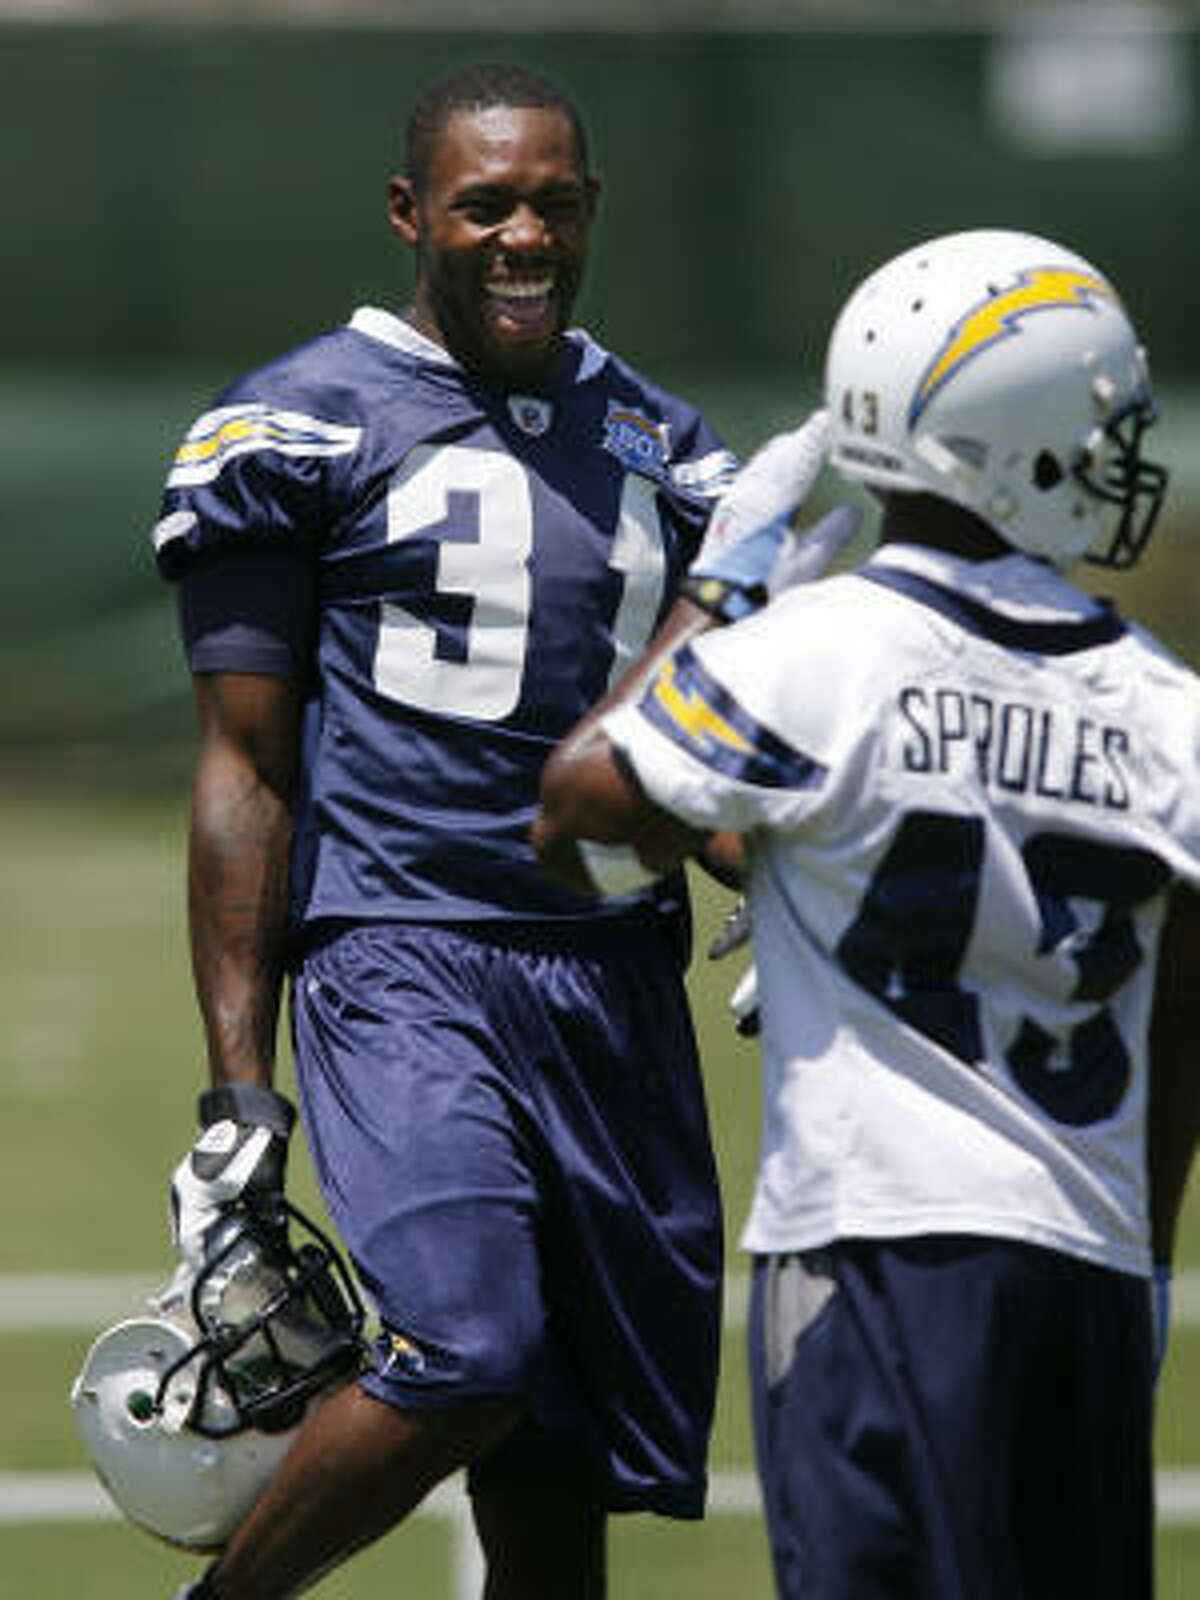 Chargers corner Antonio Cromartie laughs as he talks with Darren Sproles during their training camp held at the Chargers facility in San Diego.